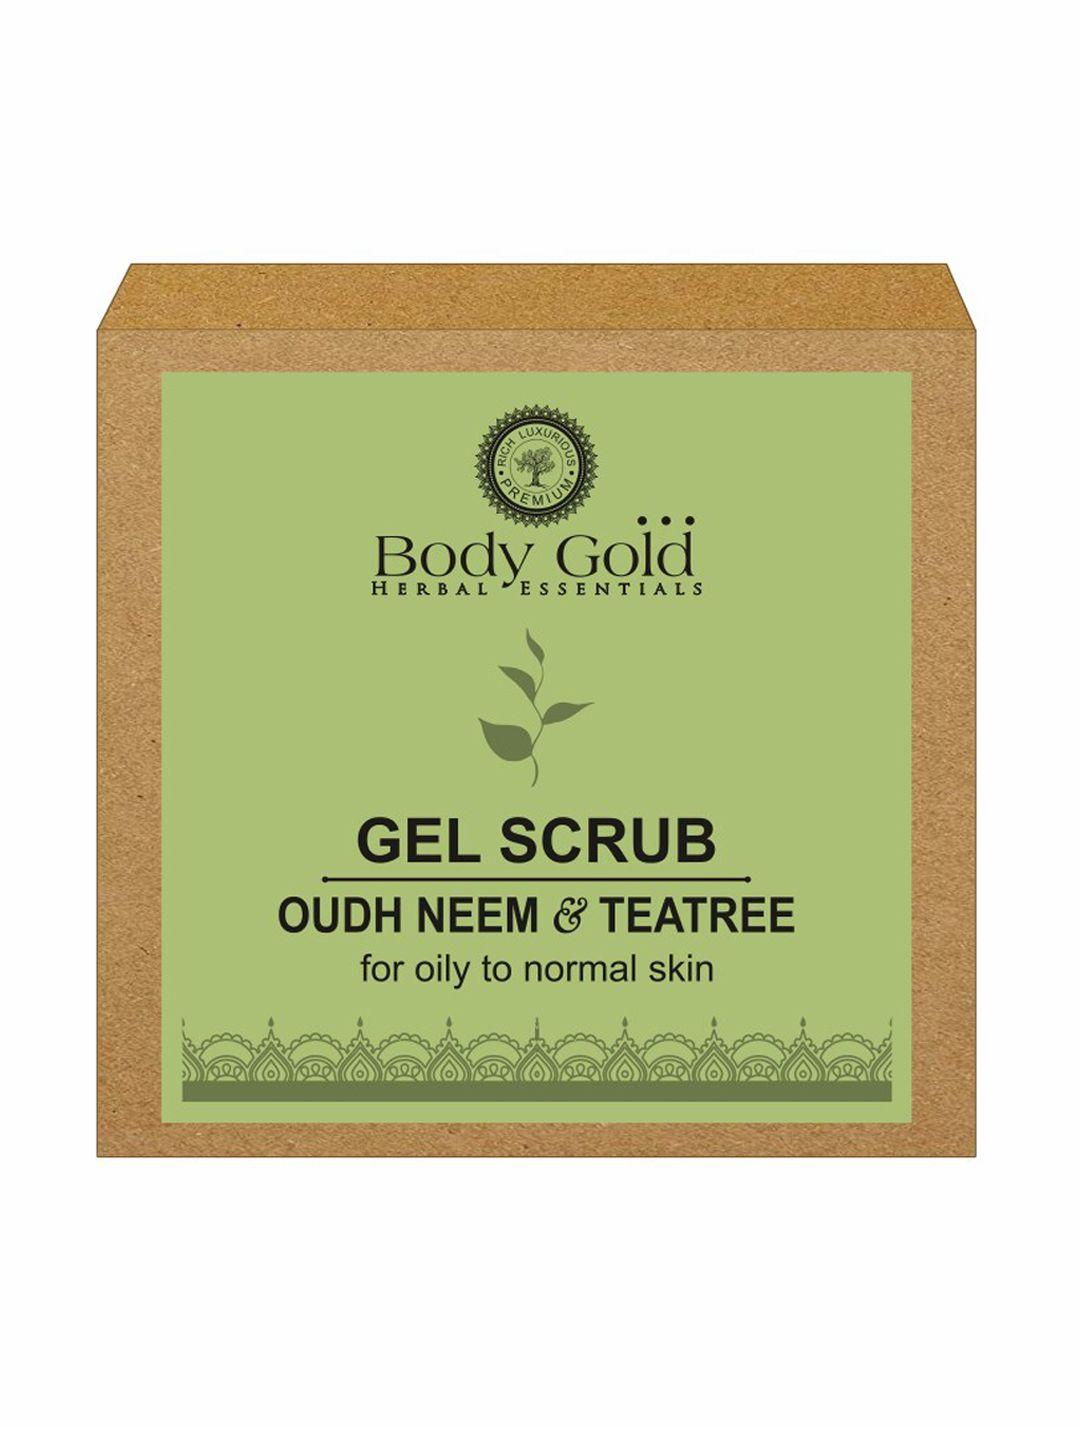 body gold oudh neem & tea tree face gel scrub for oily to normal skin - 50 g